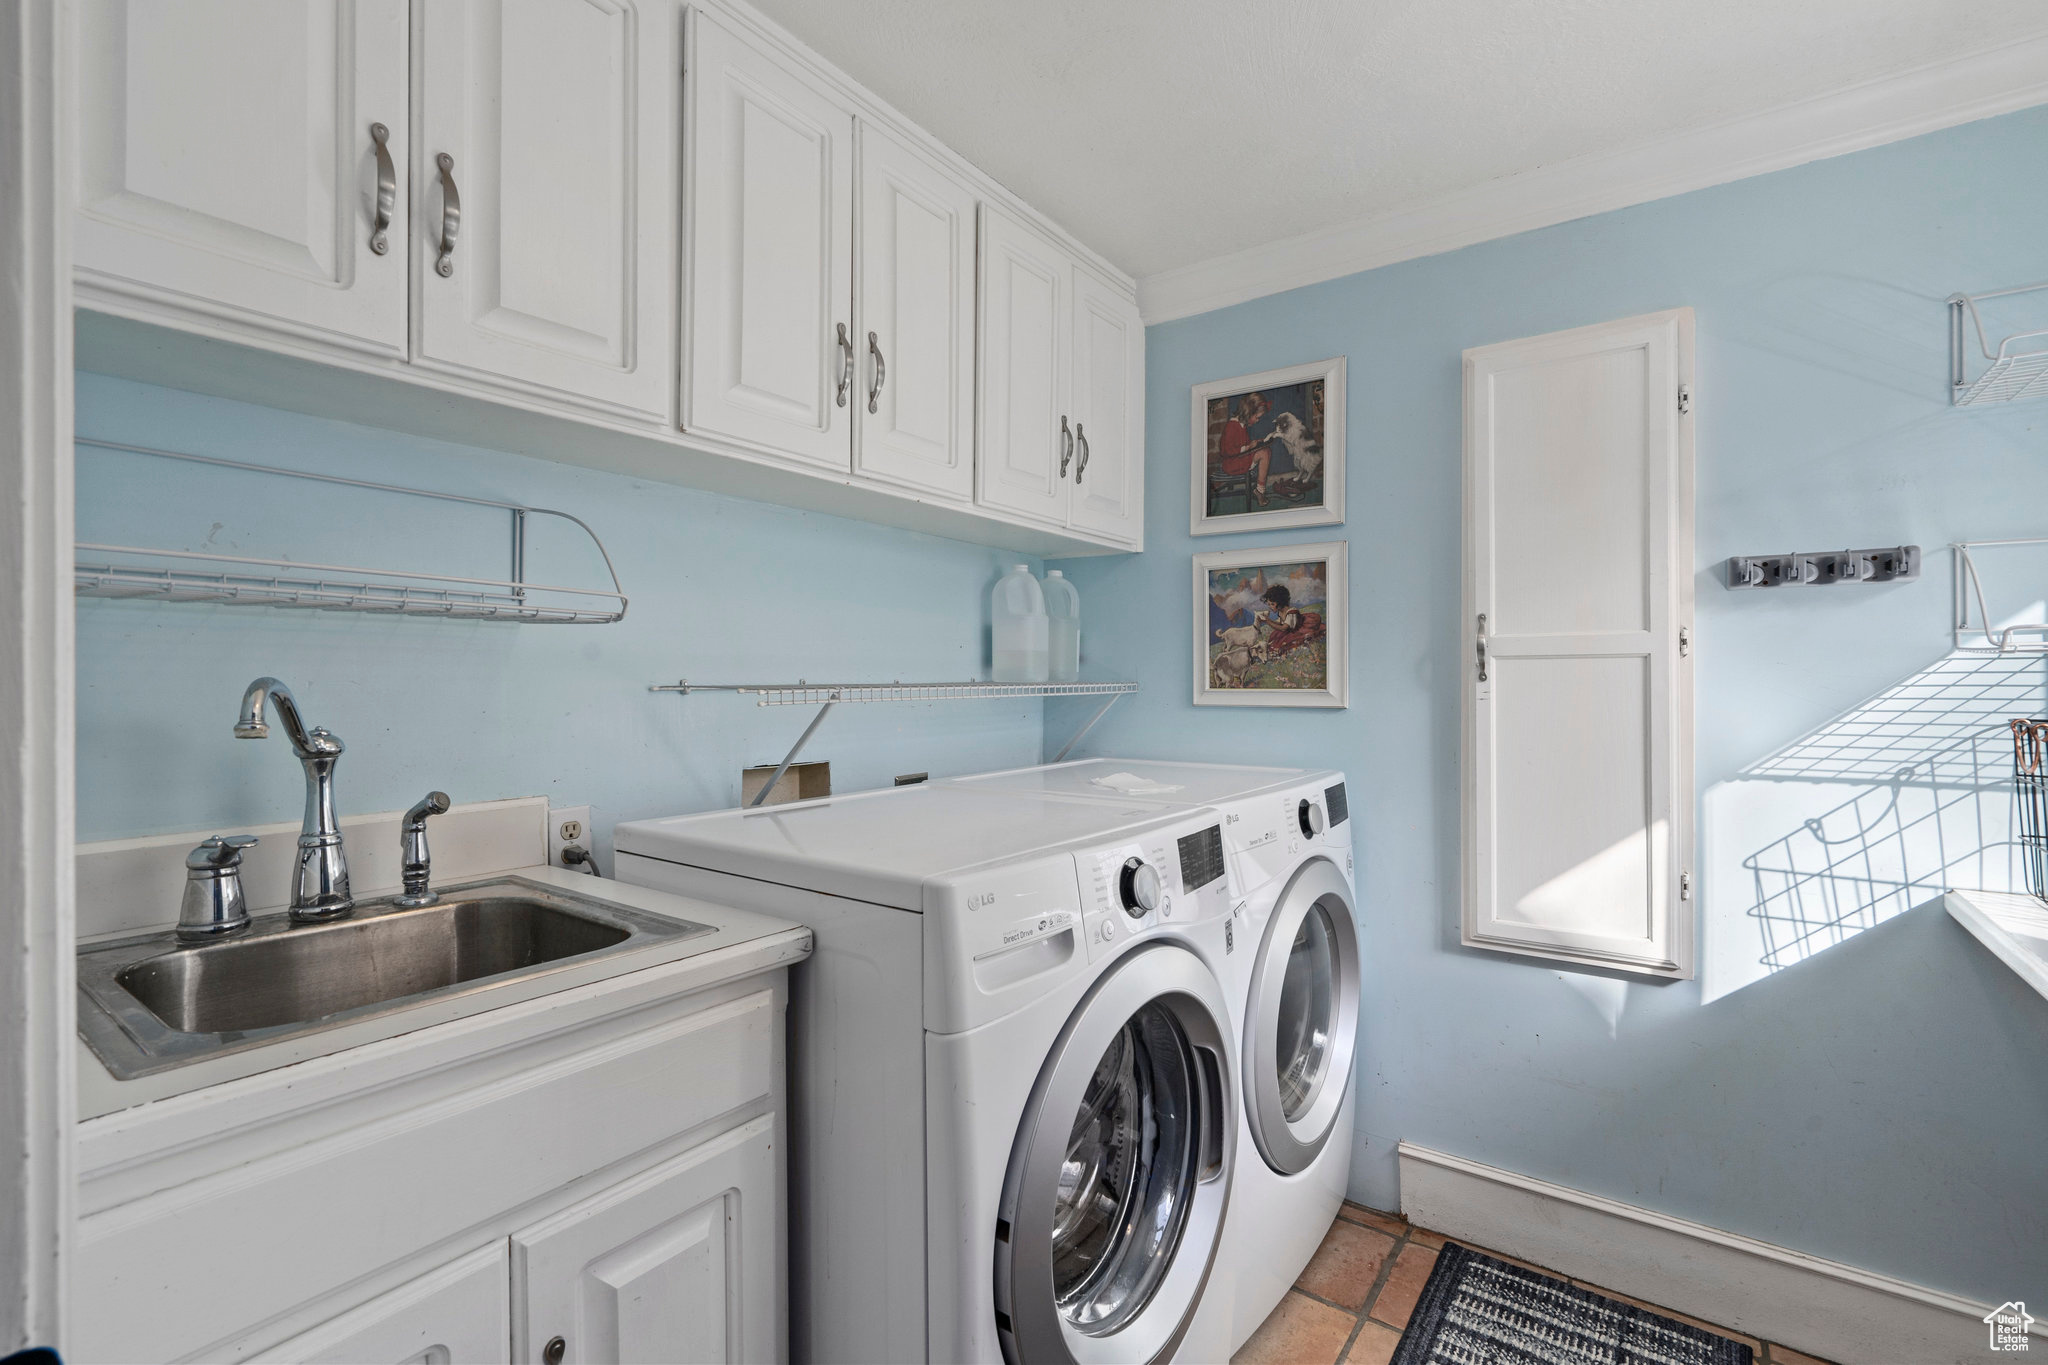 Laundry room with washer and clothes dryer, cabinets, crown molding, sink, and light tile floors